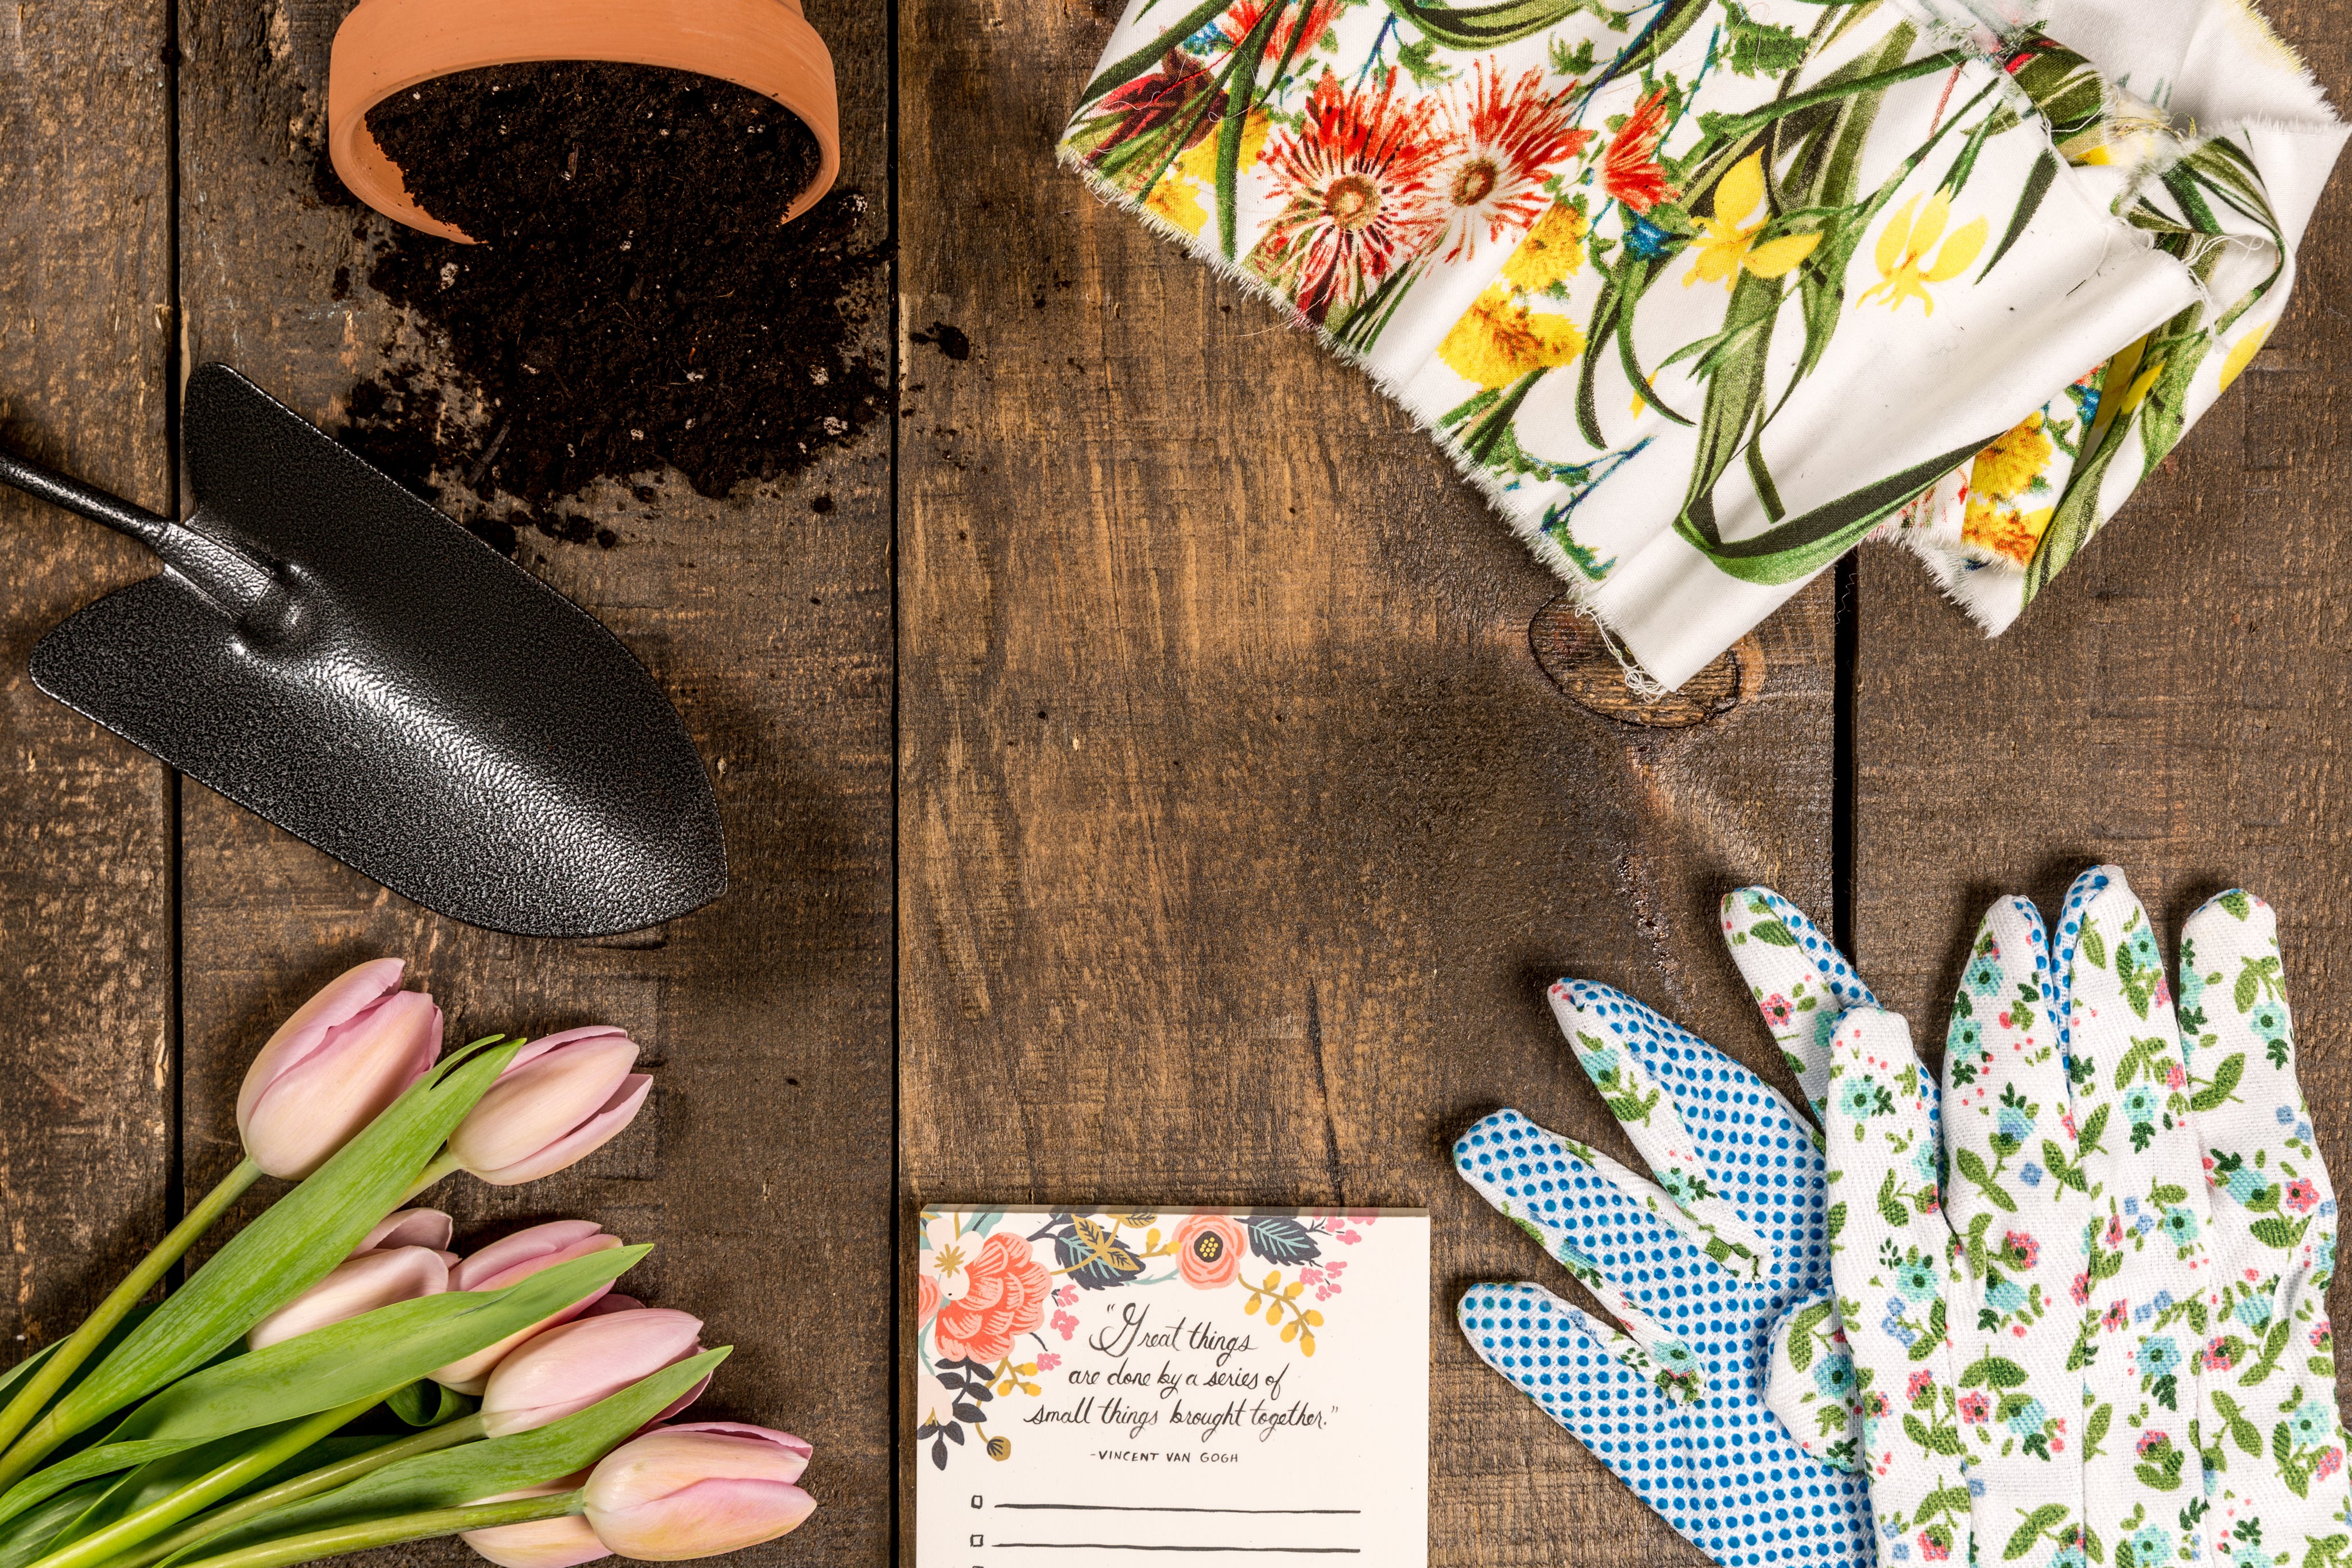 gardening tools - small shovel, terracotta pot with soil spilling out, towels with red, yellow & green flows on it, gardening gloves with a flower. pattern, a piece of paper with flowers at the top next to pink tulips - on top of dark wood planks